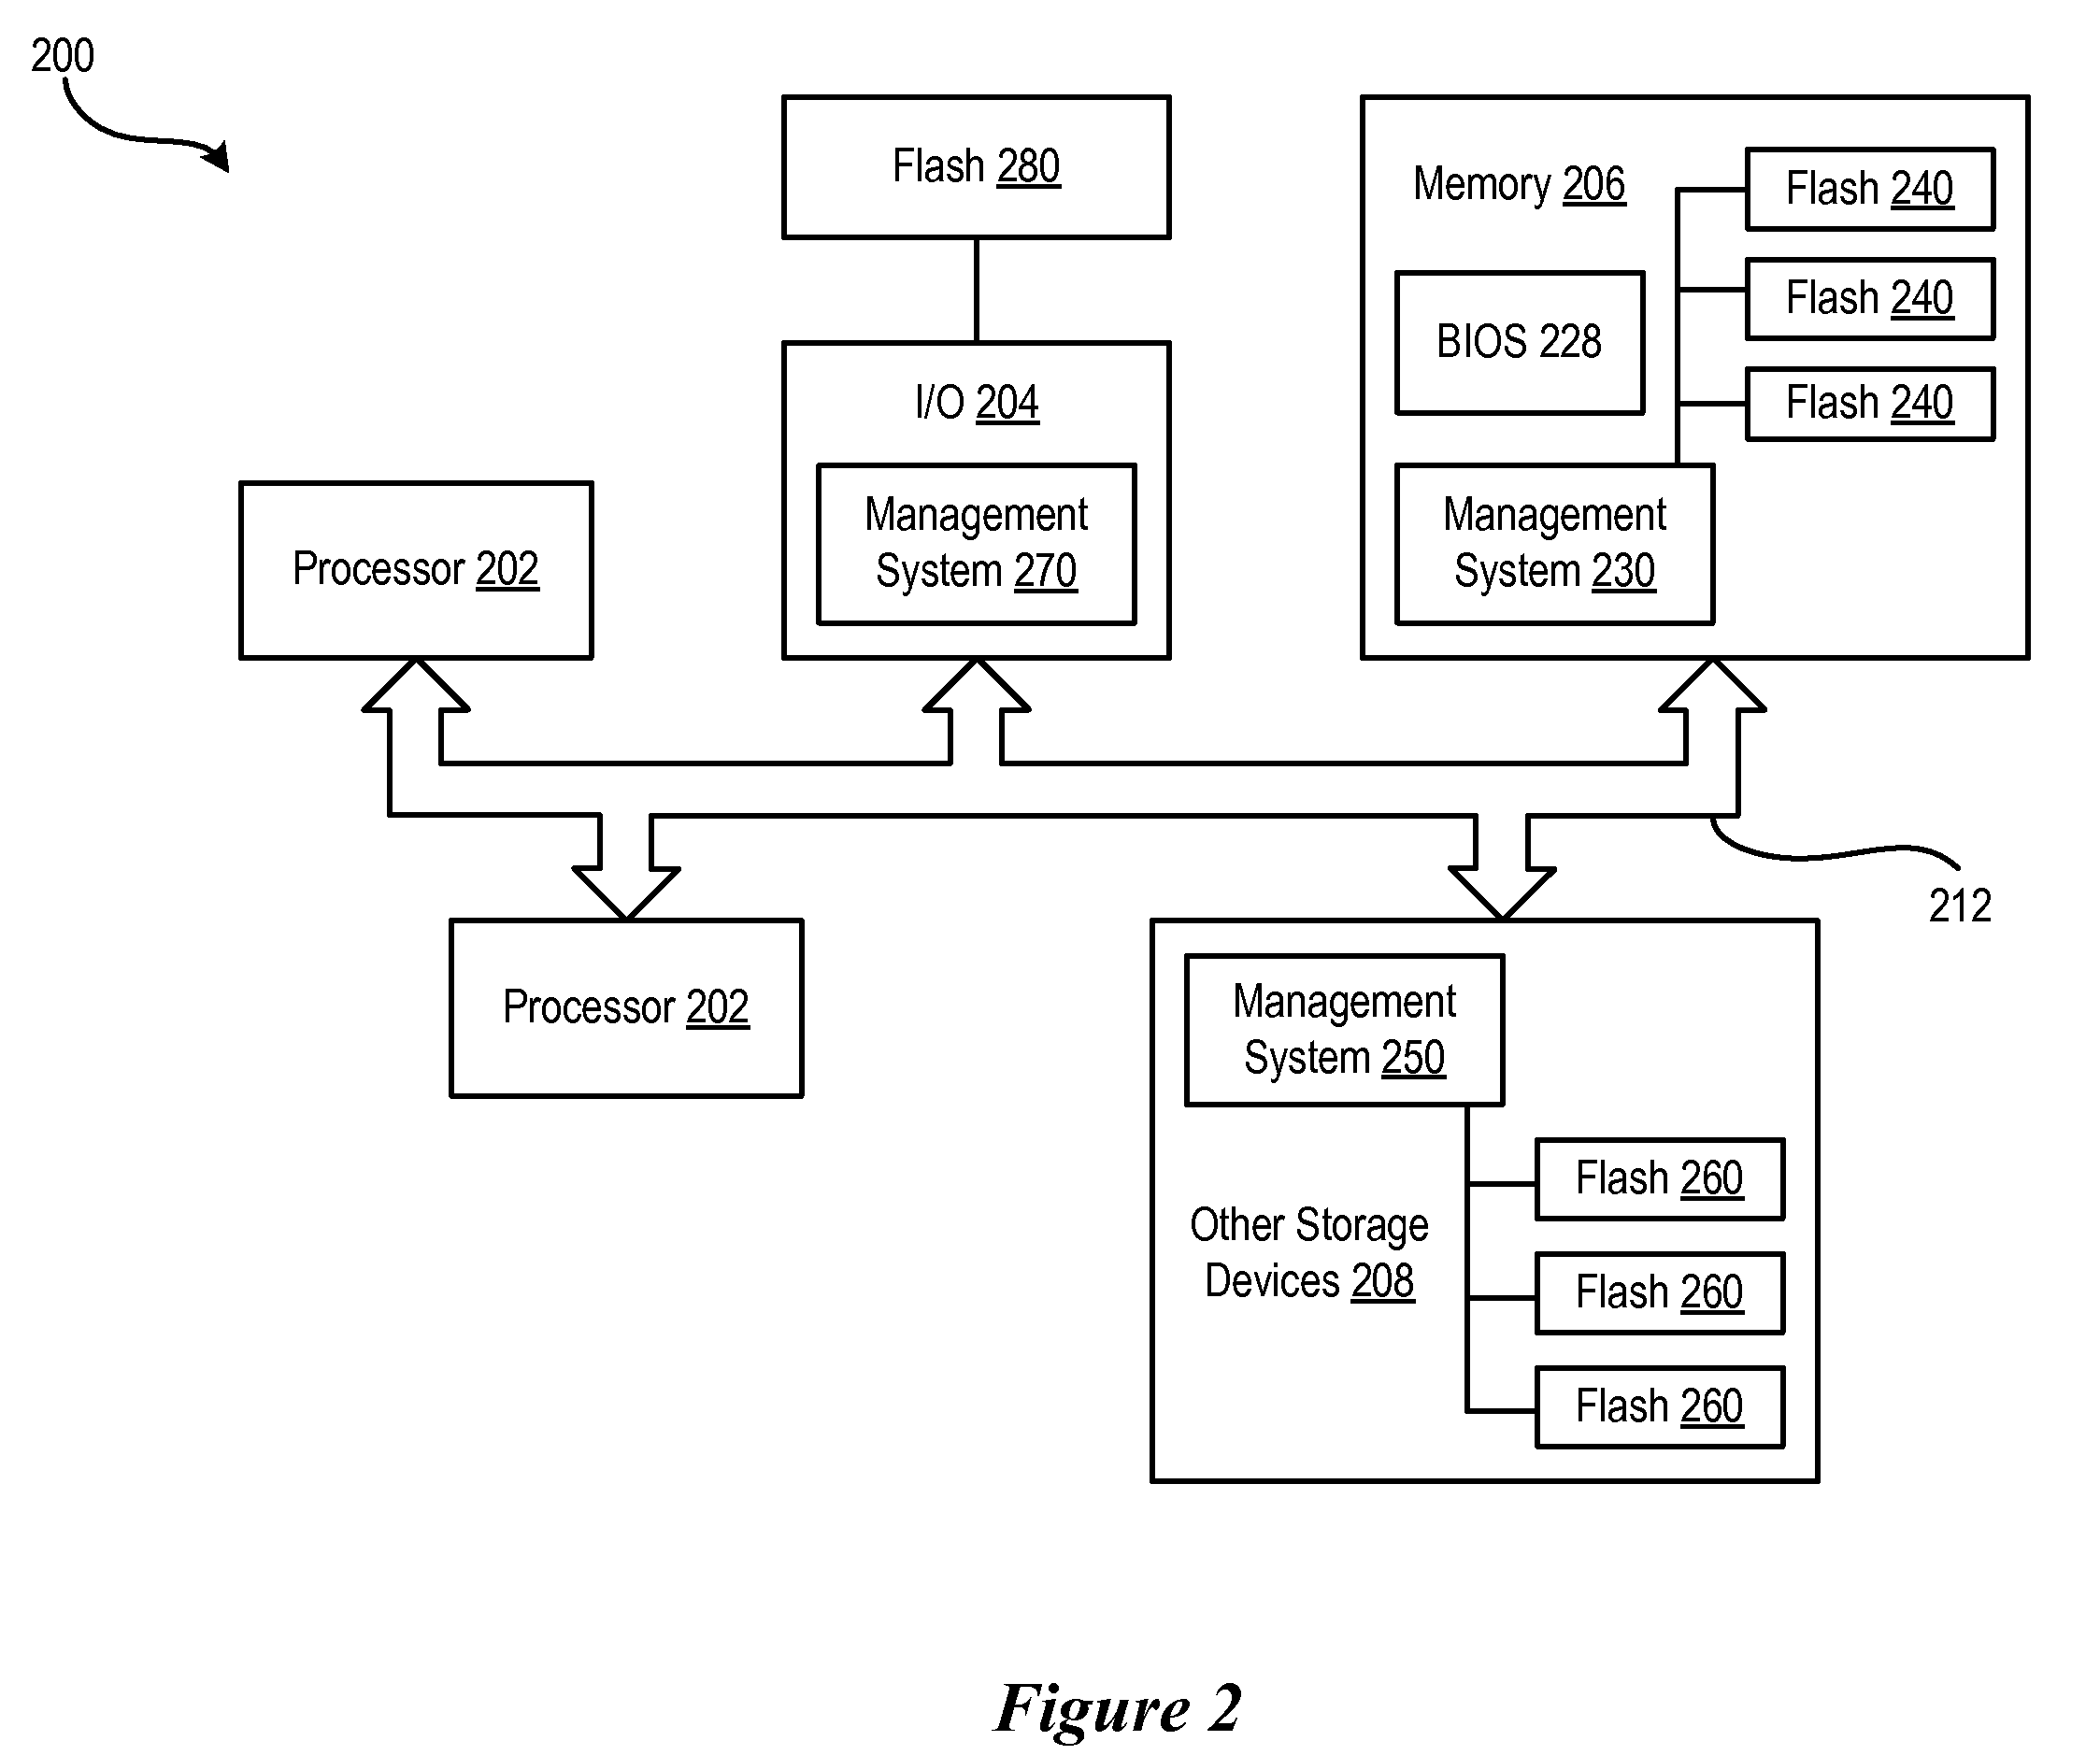 Reliability System for Use with Non-Volatile Memory Devices